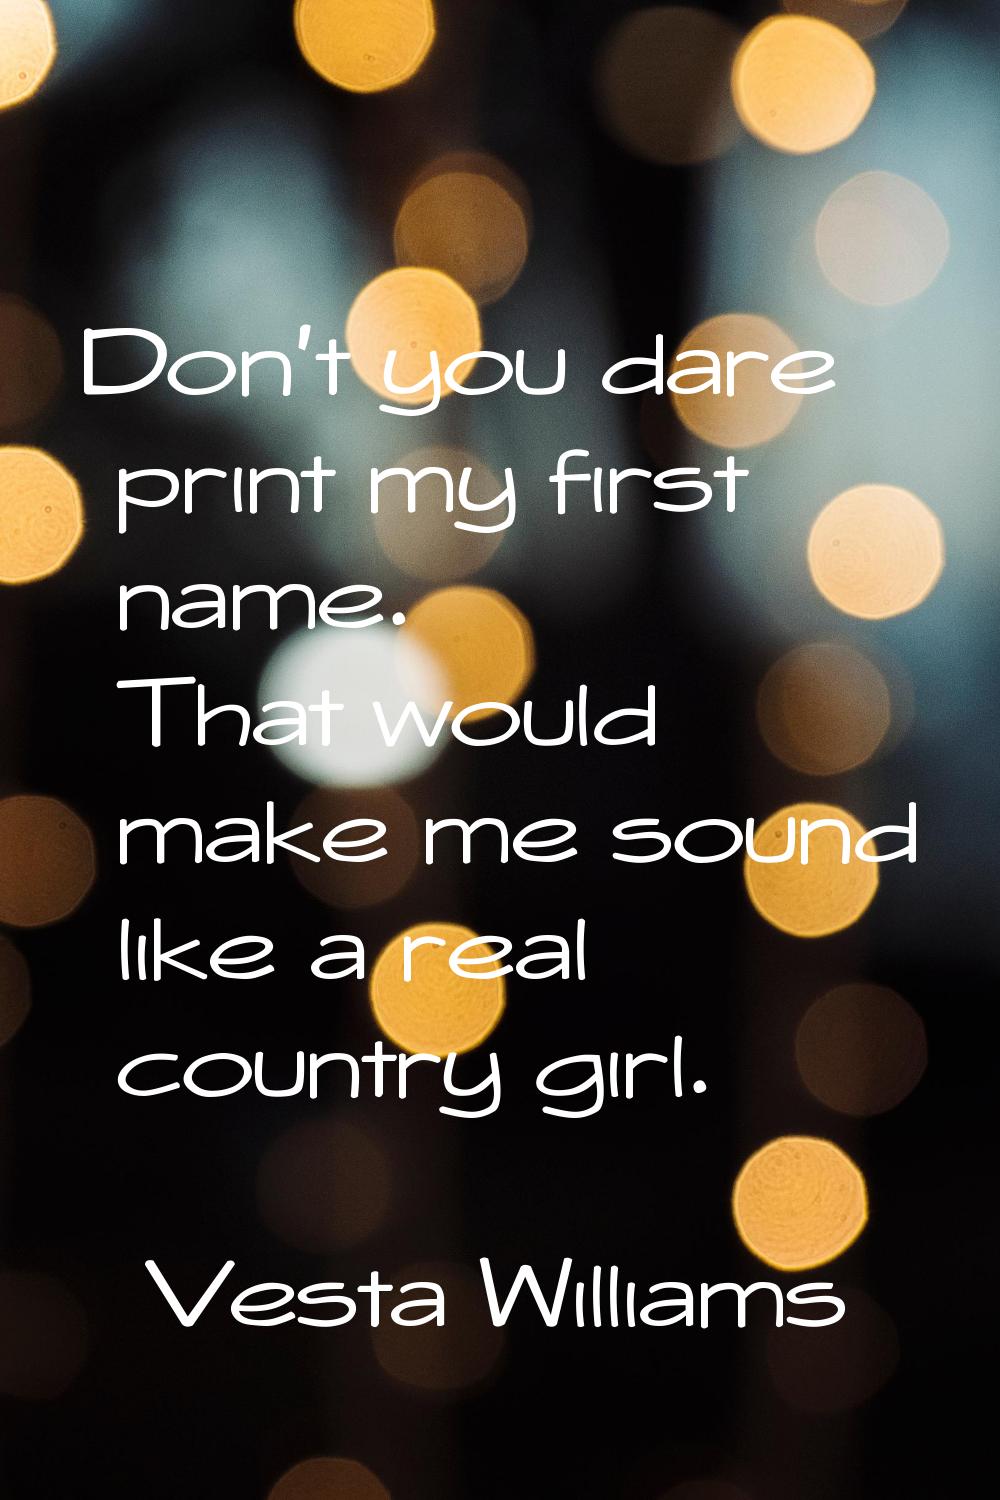 Don't you dare print my first name. That would make me sound like a real country girl.